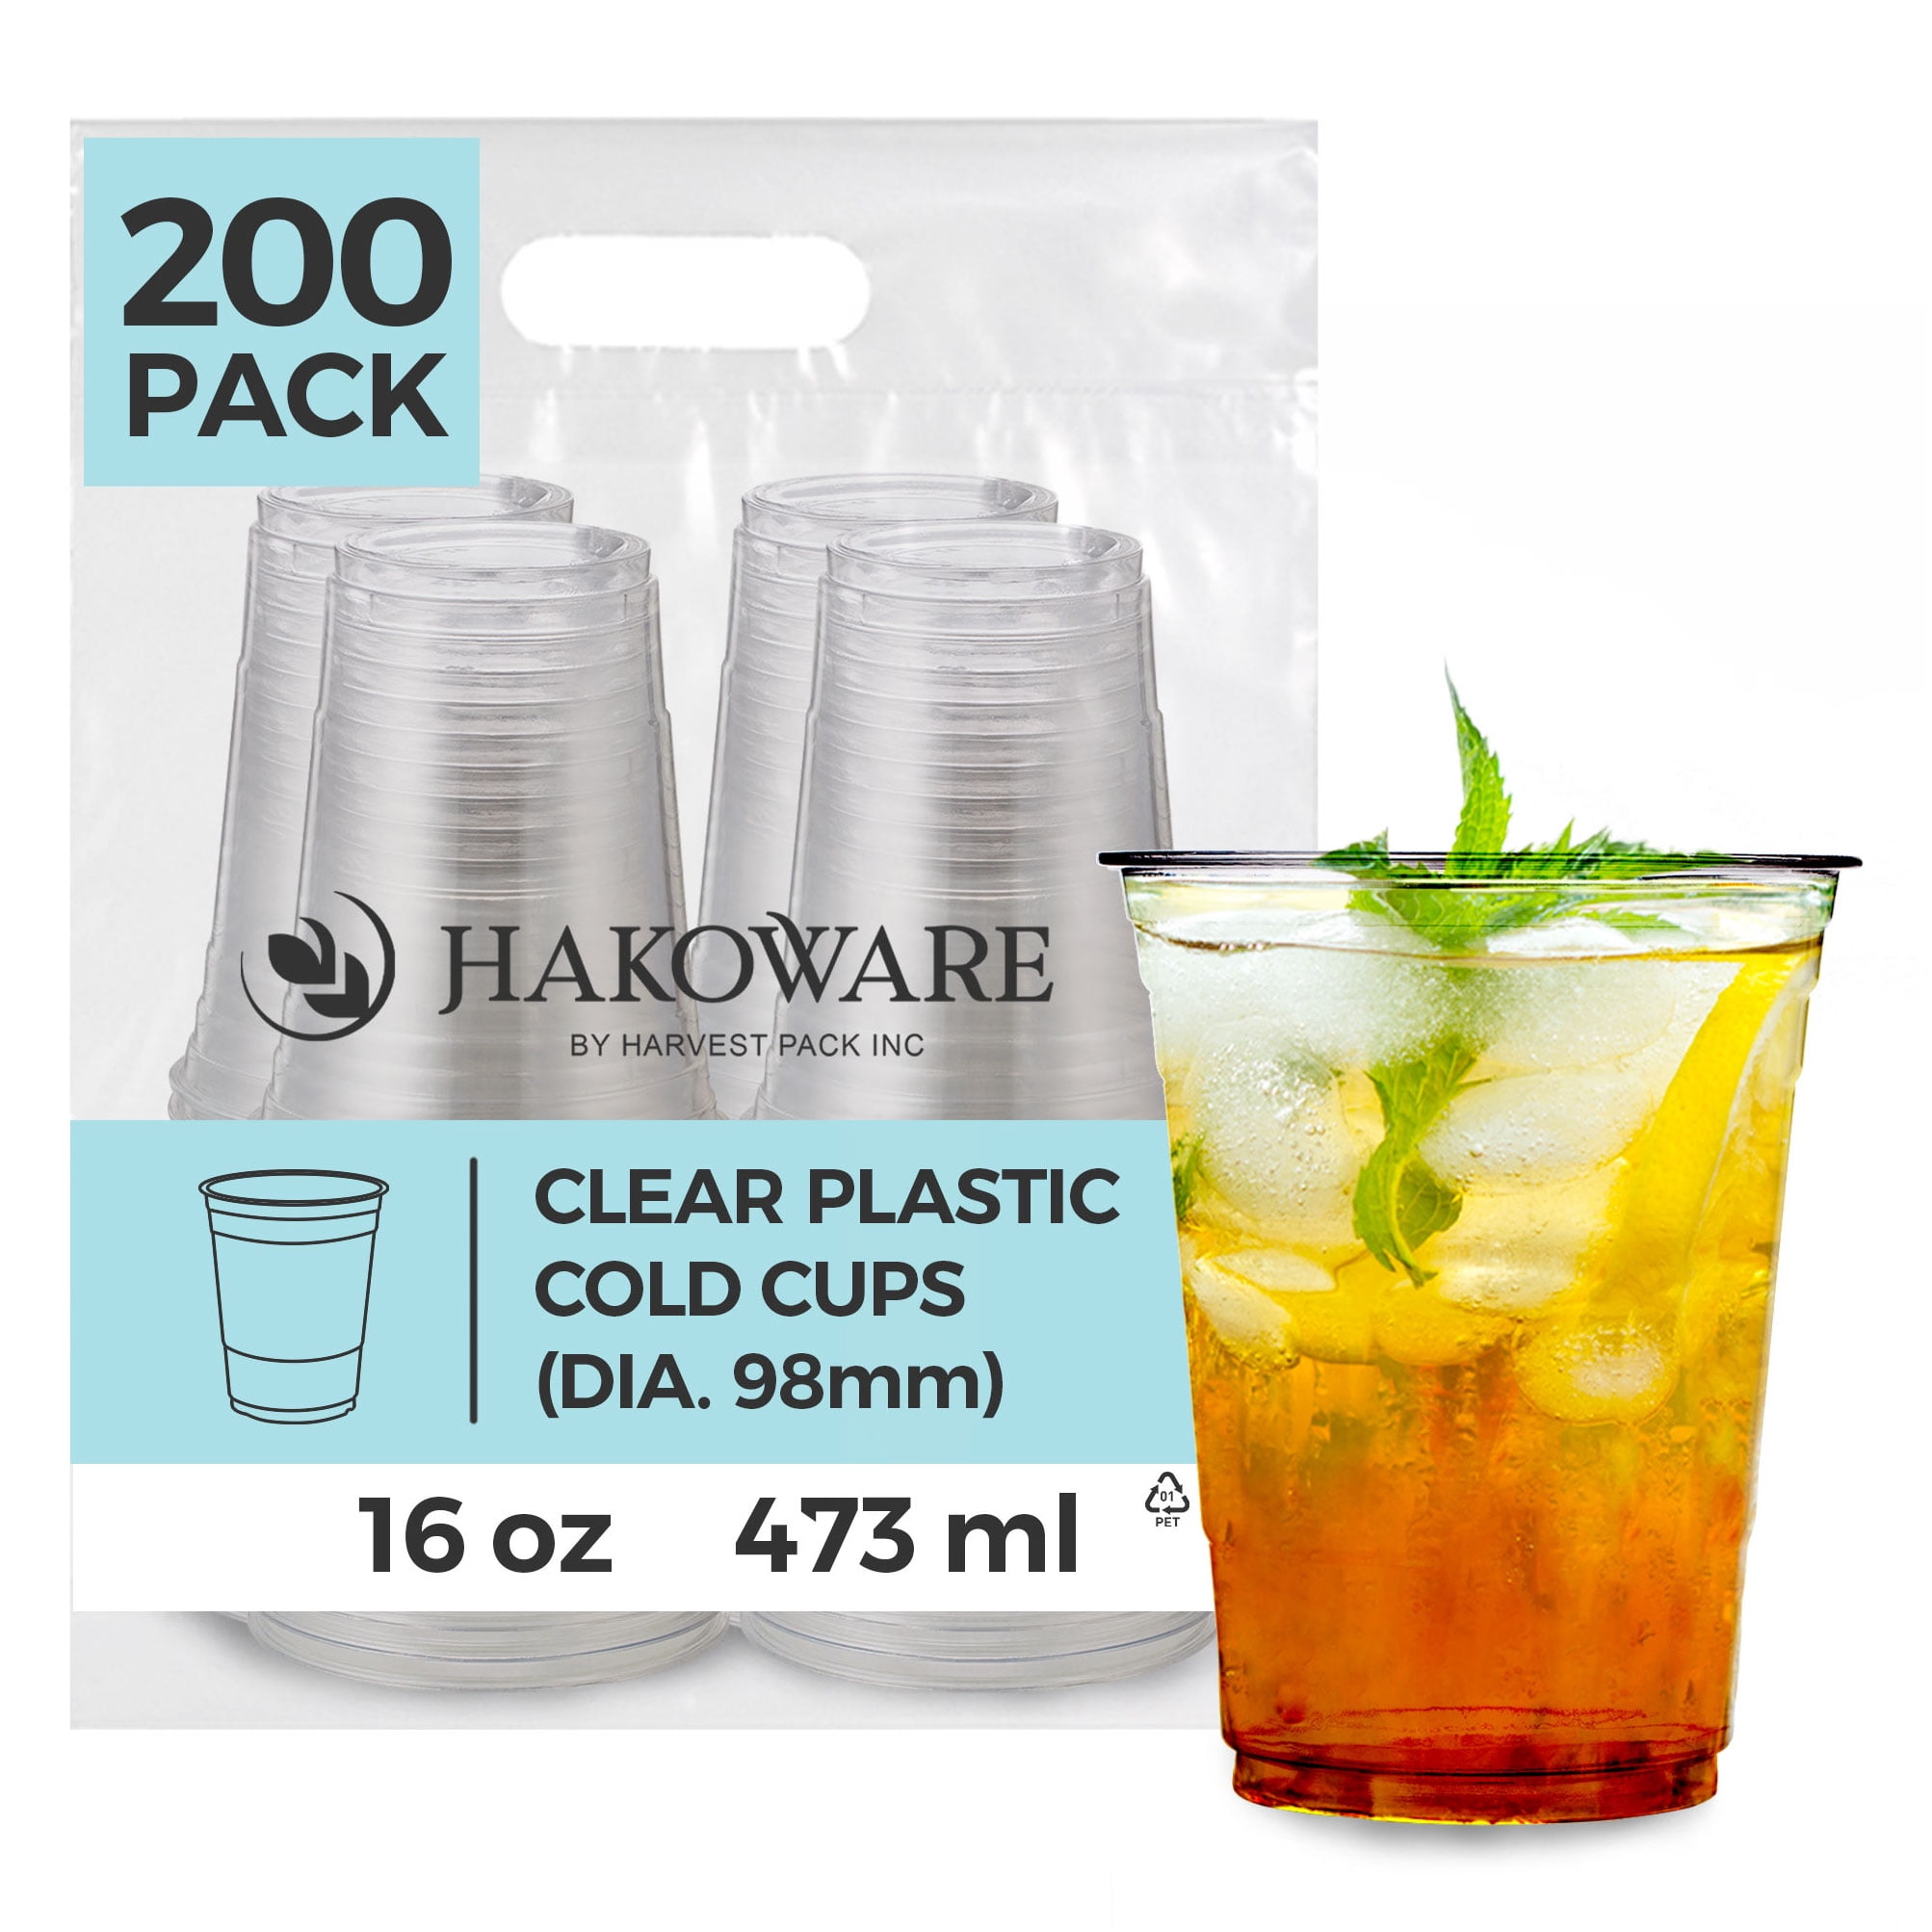  Ball Aluminum Cup Recyclable Party Cups, Wholesale Bulk Pack,  20 oz. Cup, 600 Cups Per Pack : Health & Household